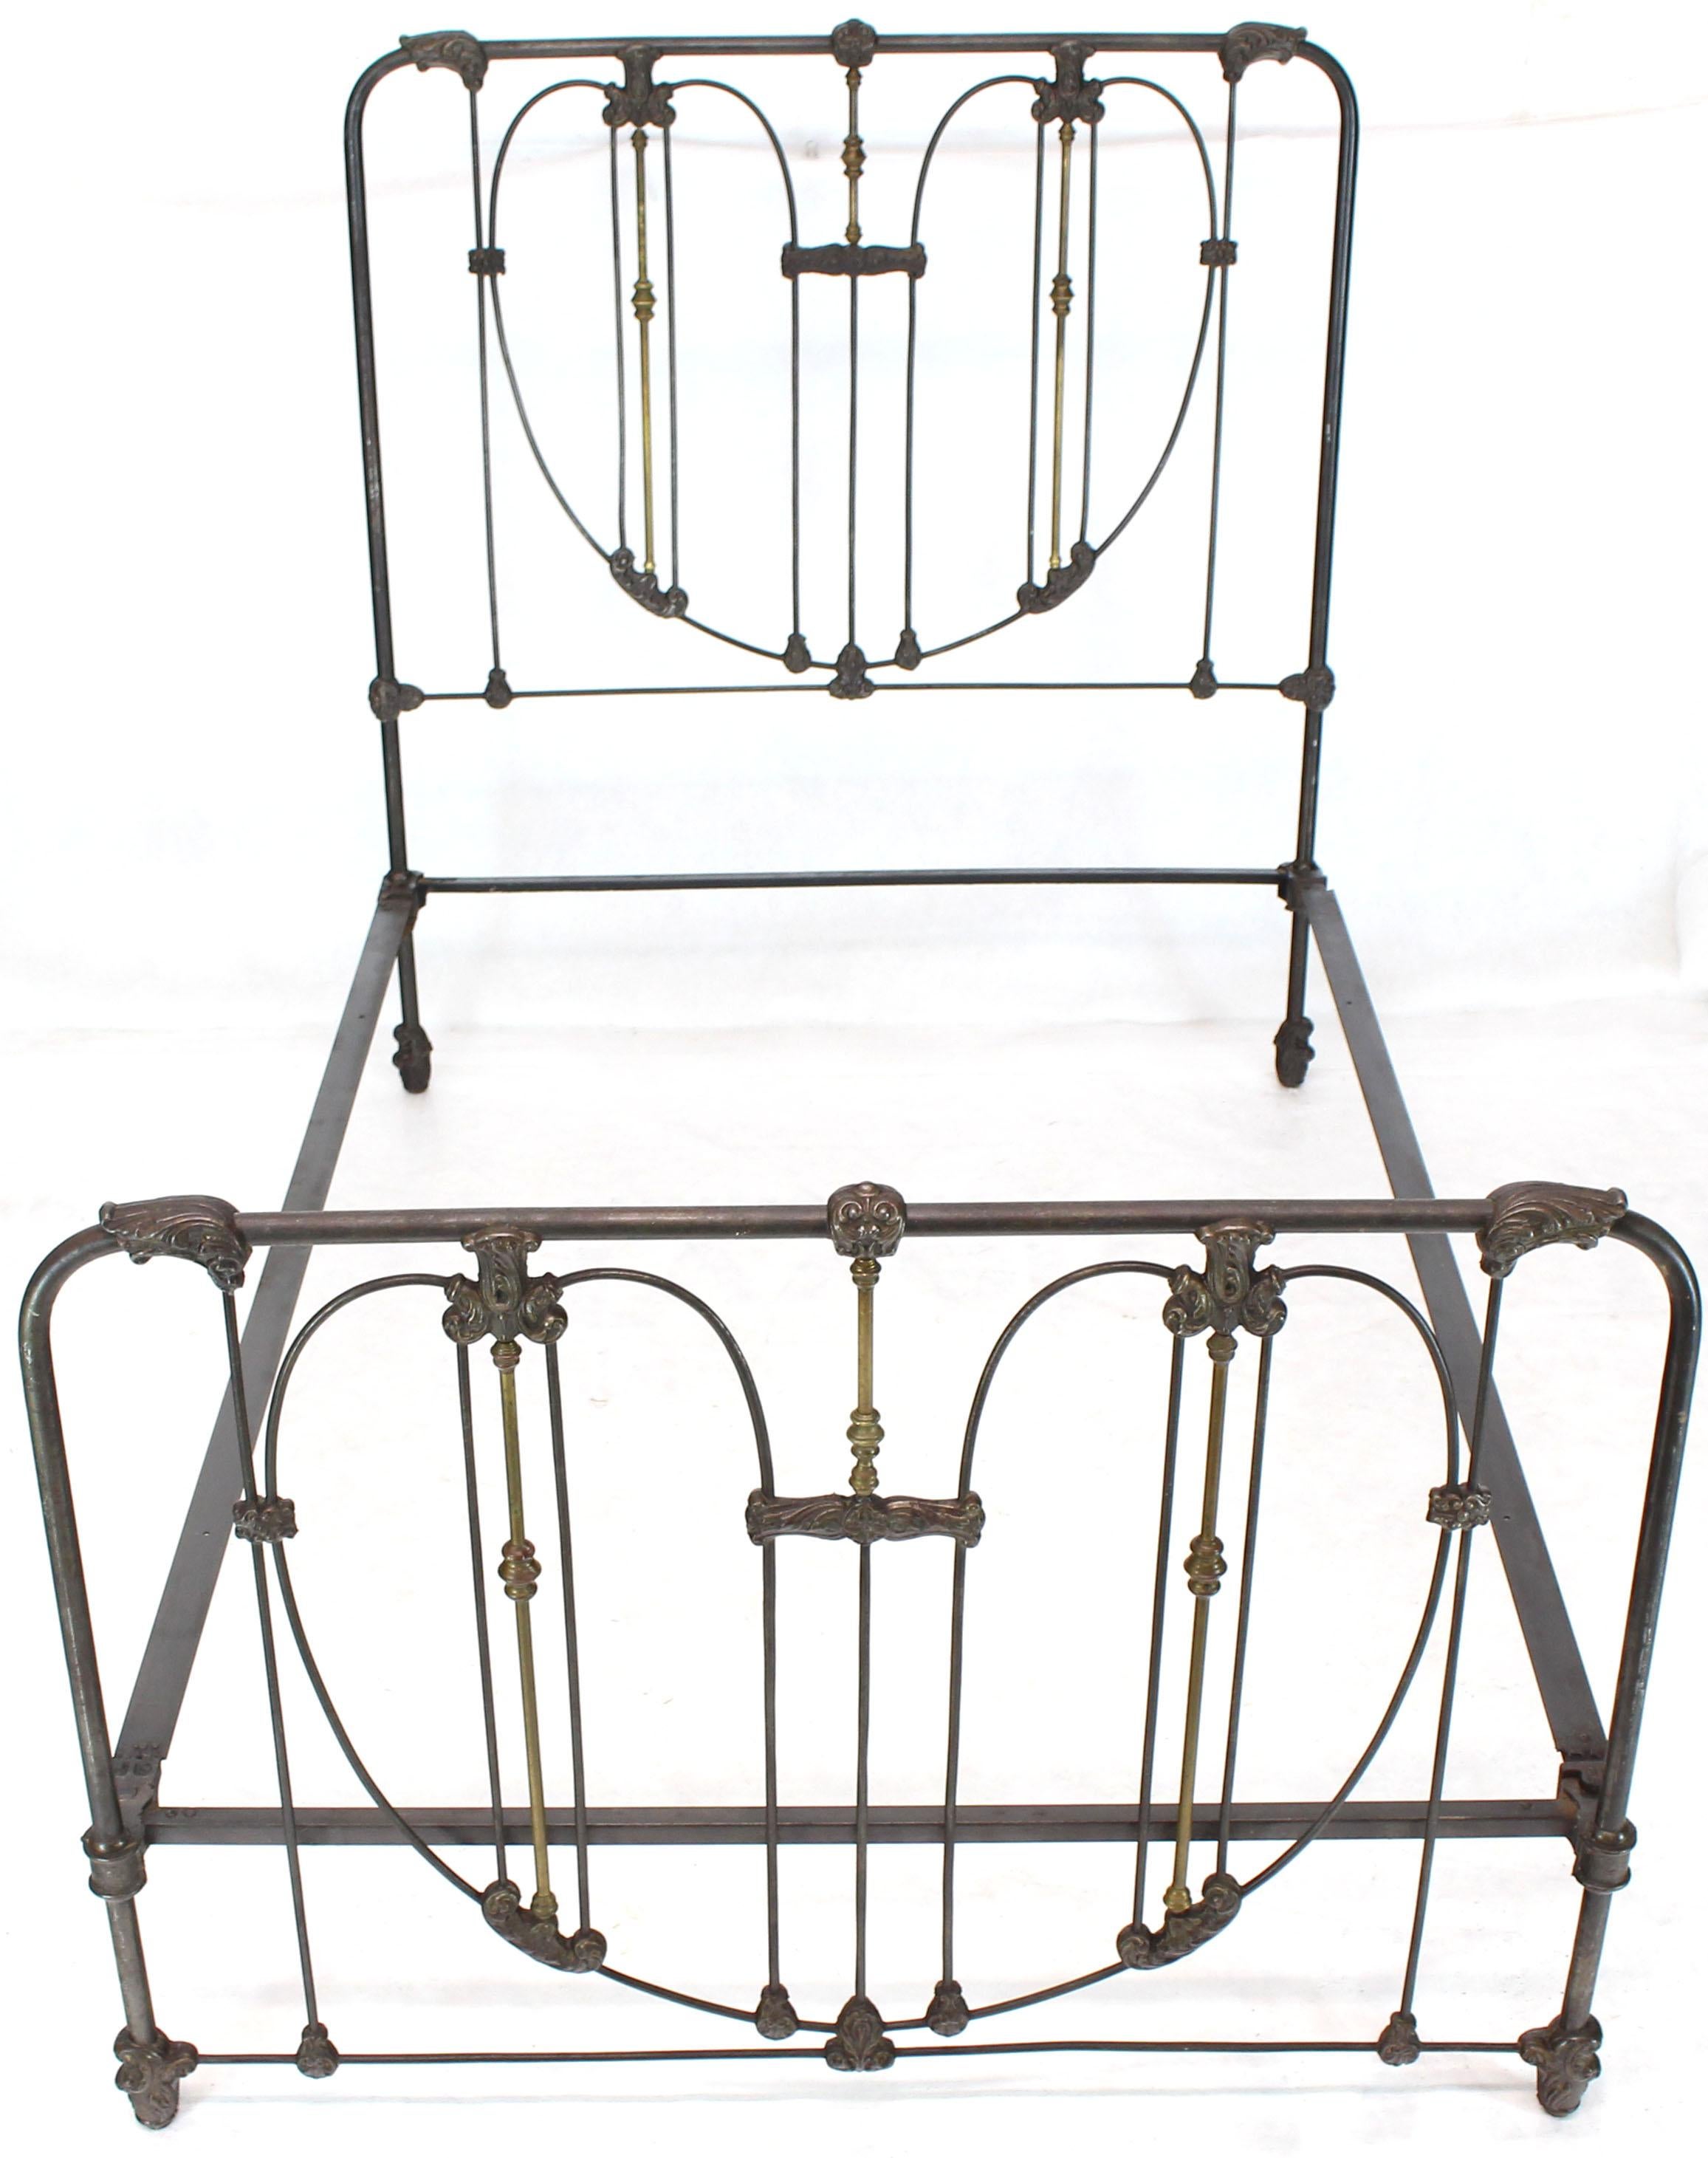 Very pretty heart pattern footboard and headboard full size antique cast iron and brass bed with rails.